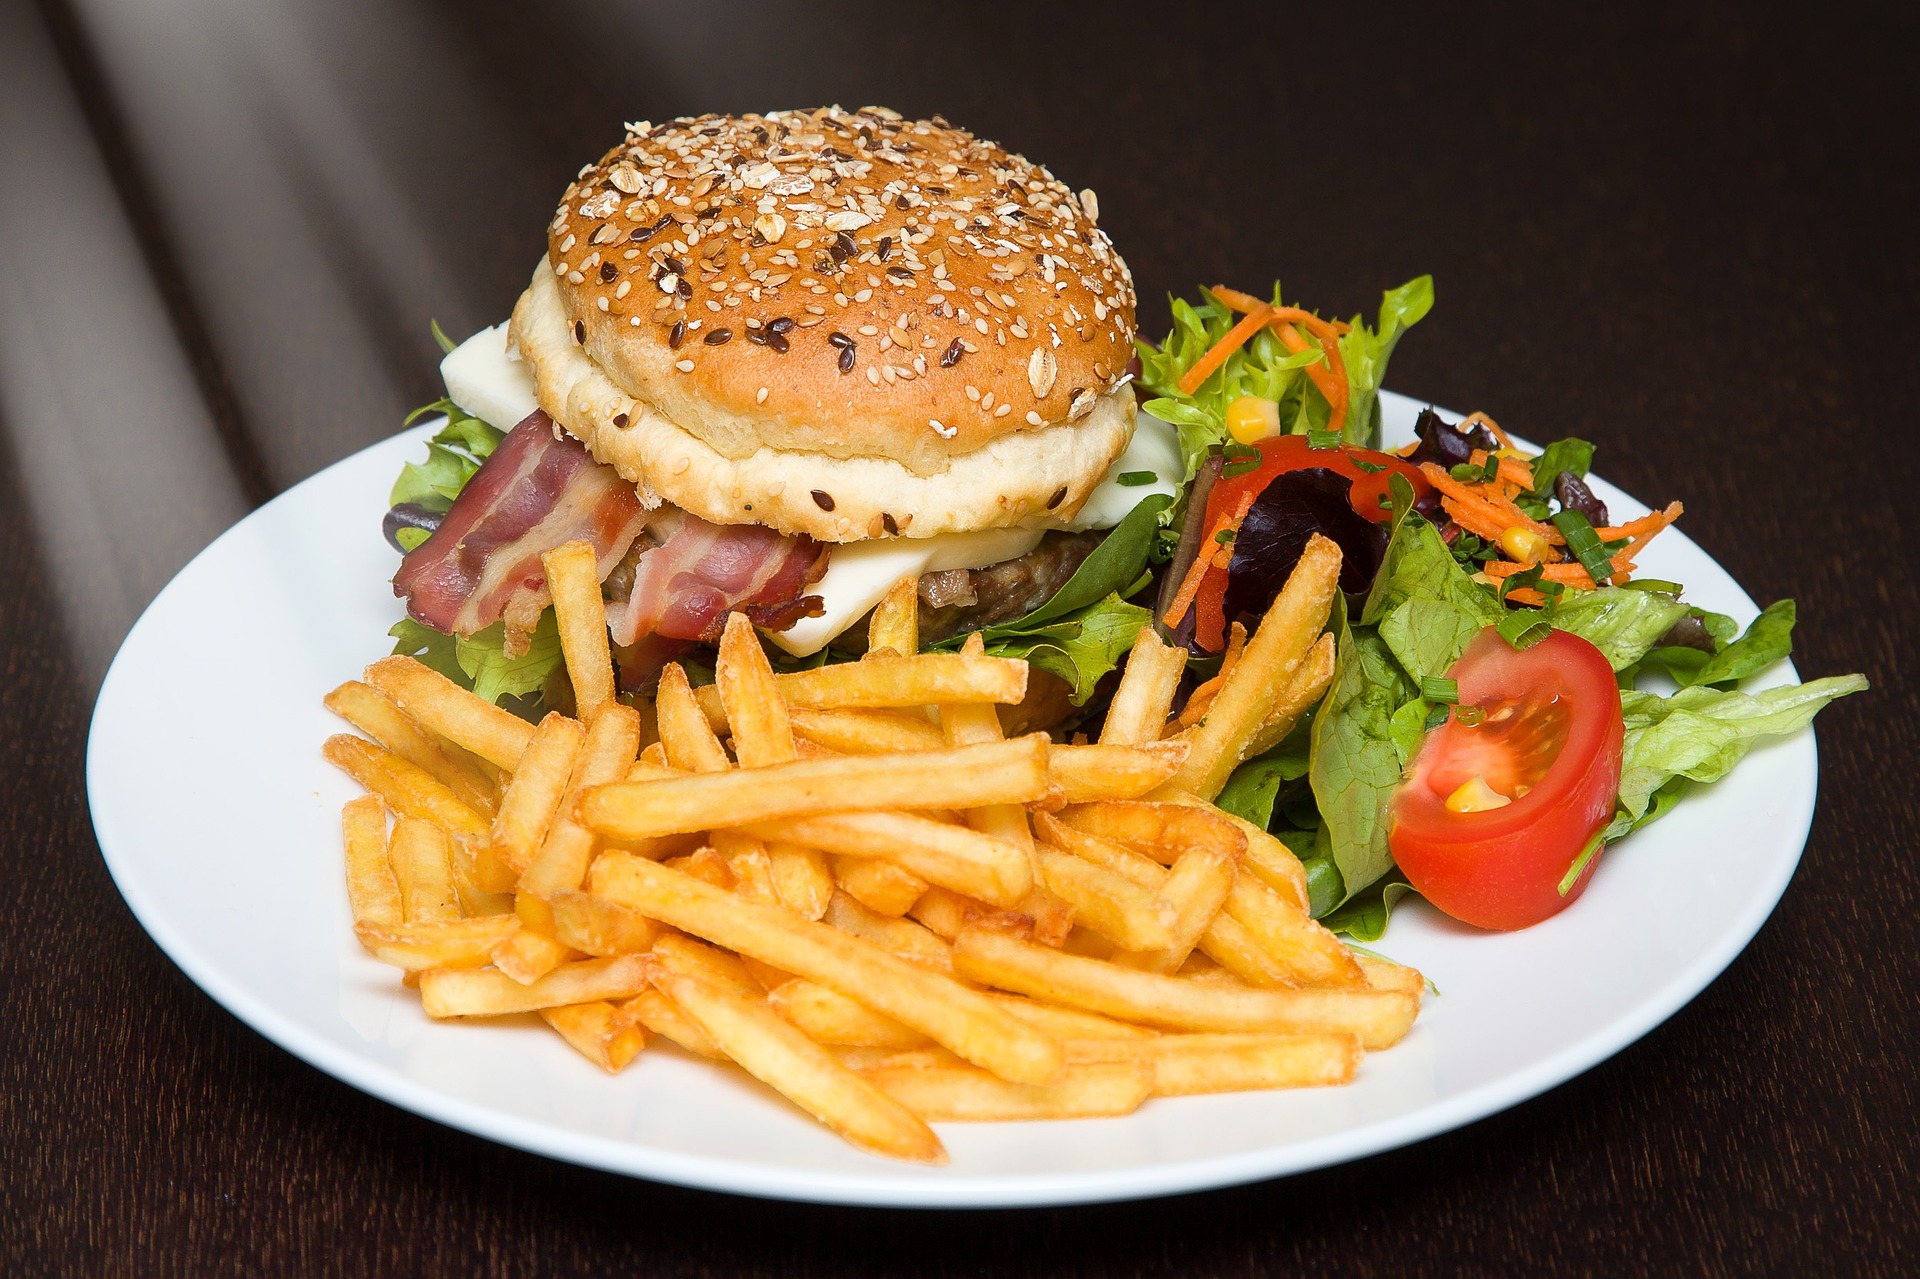 A burger with a variety of toppings on a plate with a small salad and french fries